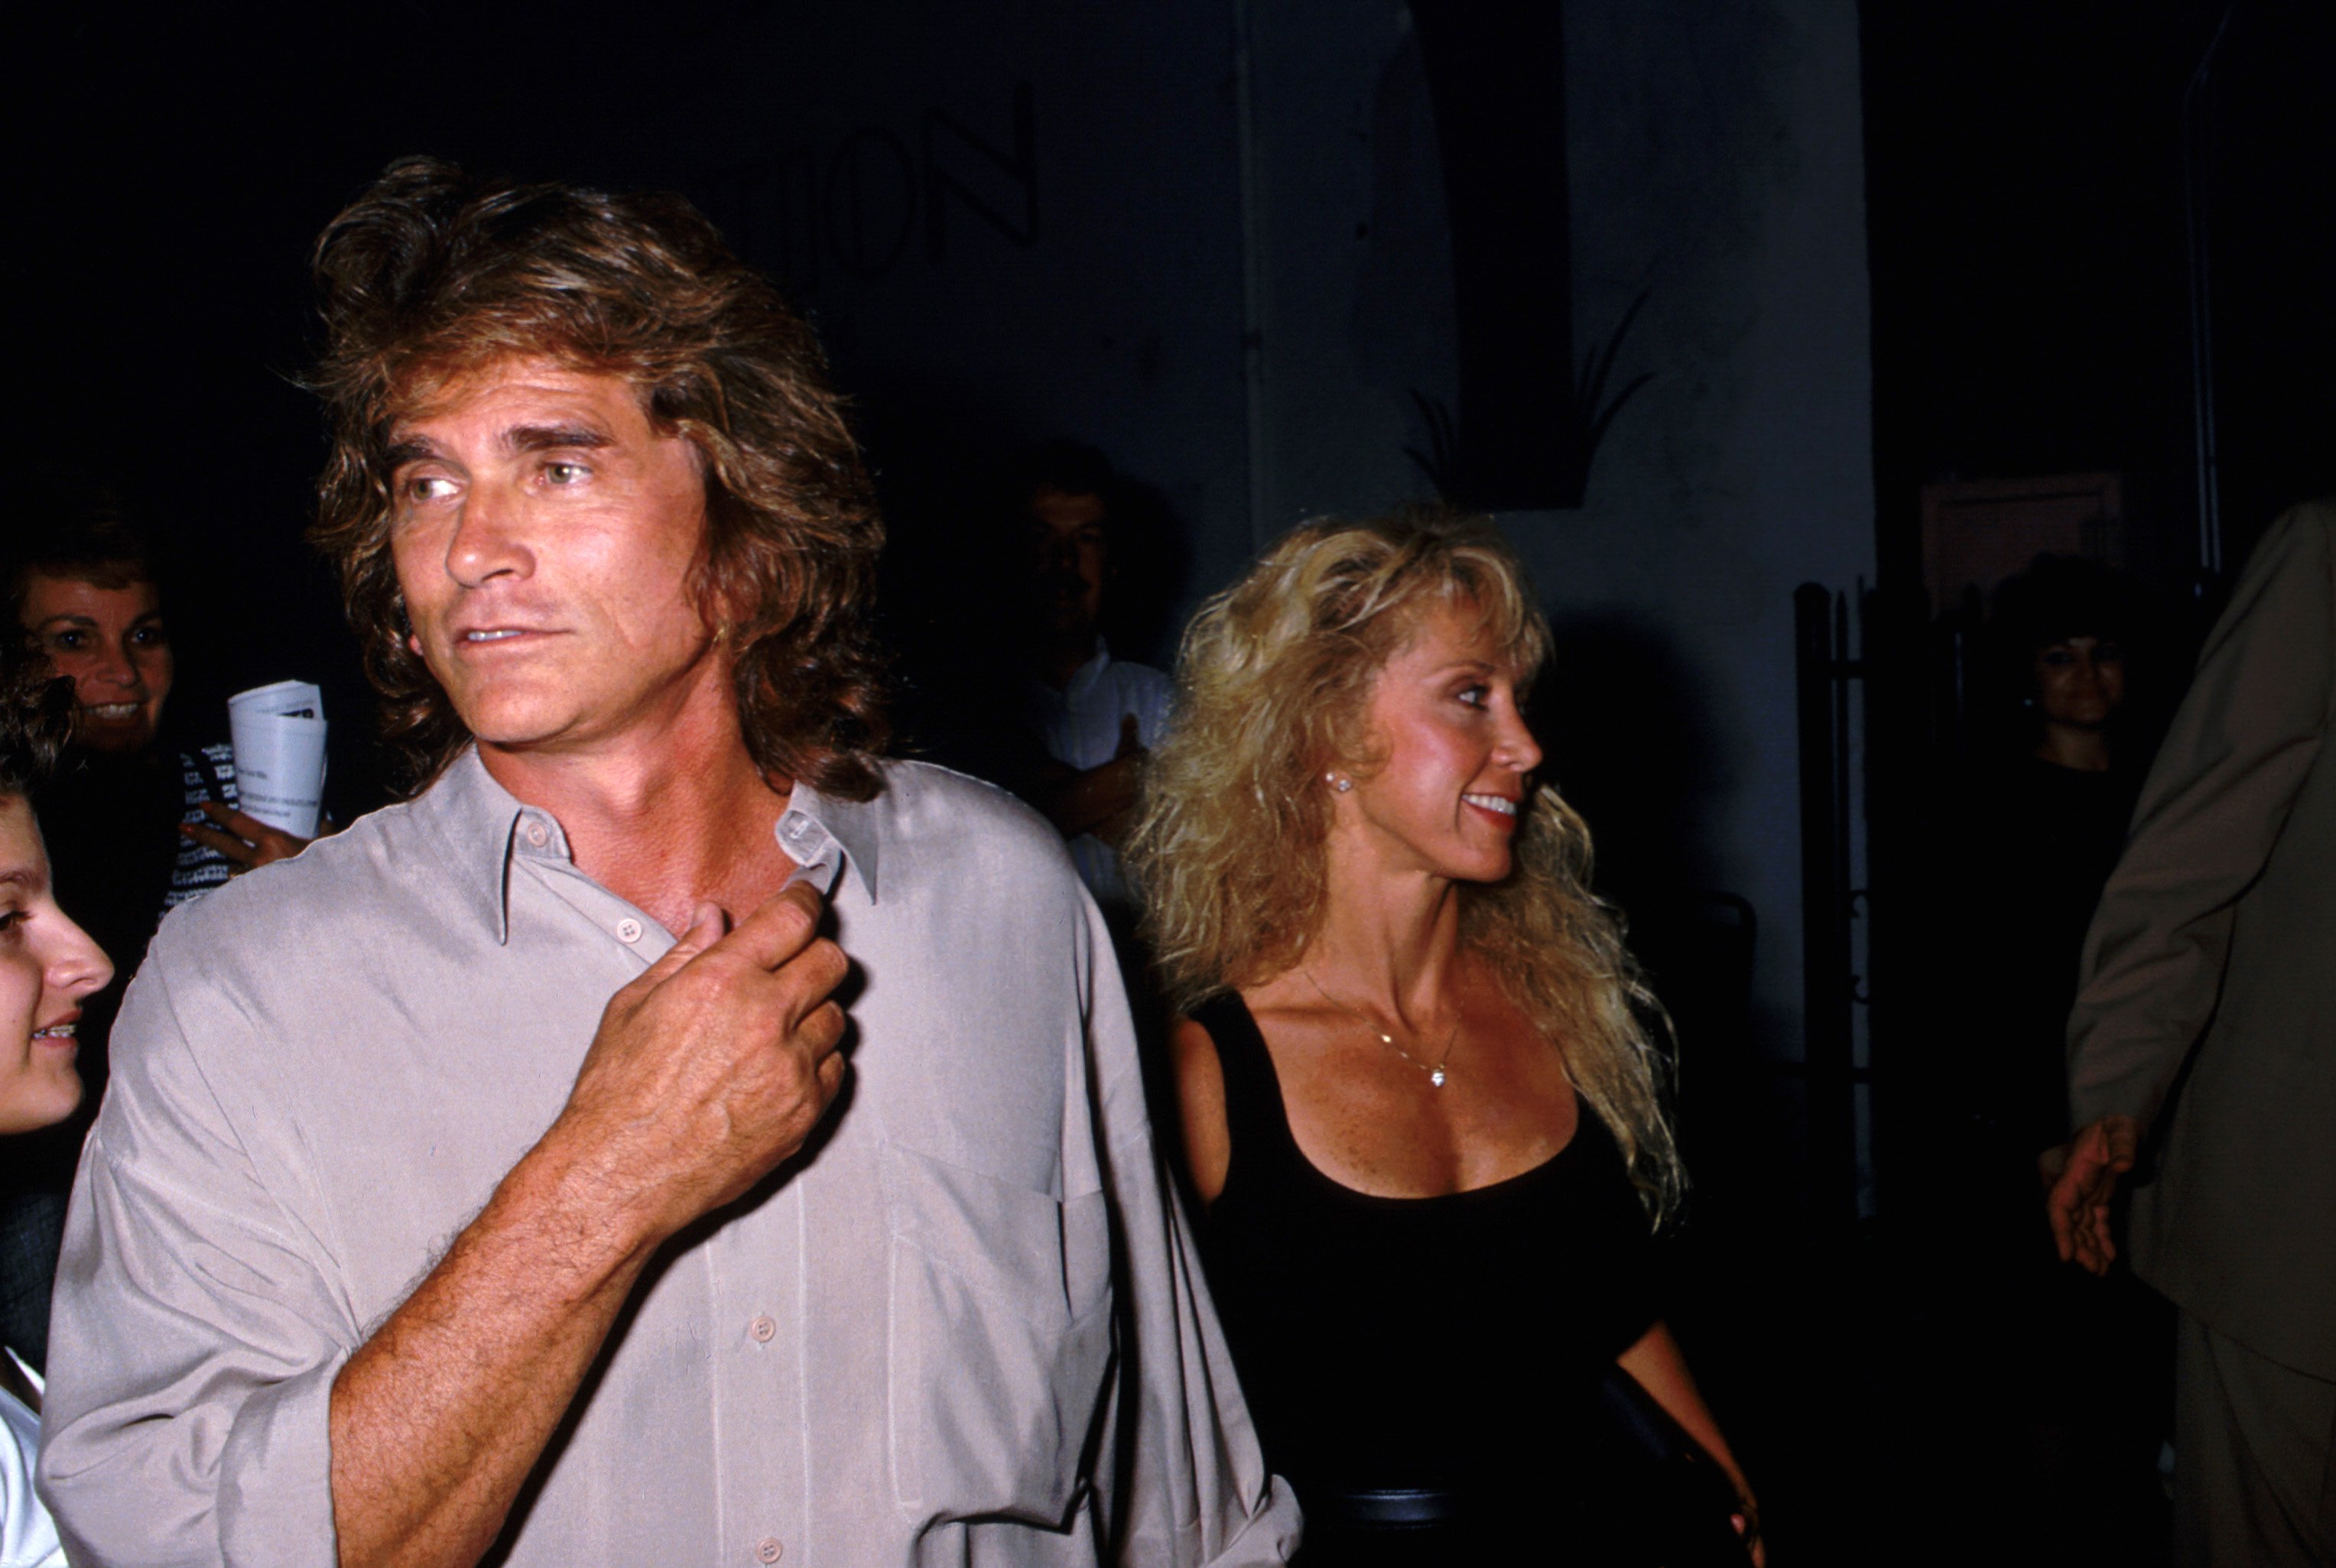 Michael Landon with his wife, Cindy | Time Life Pictures/DMI/The LIFE Picture Collection via Getty Images